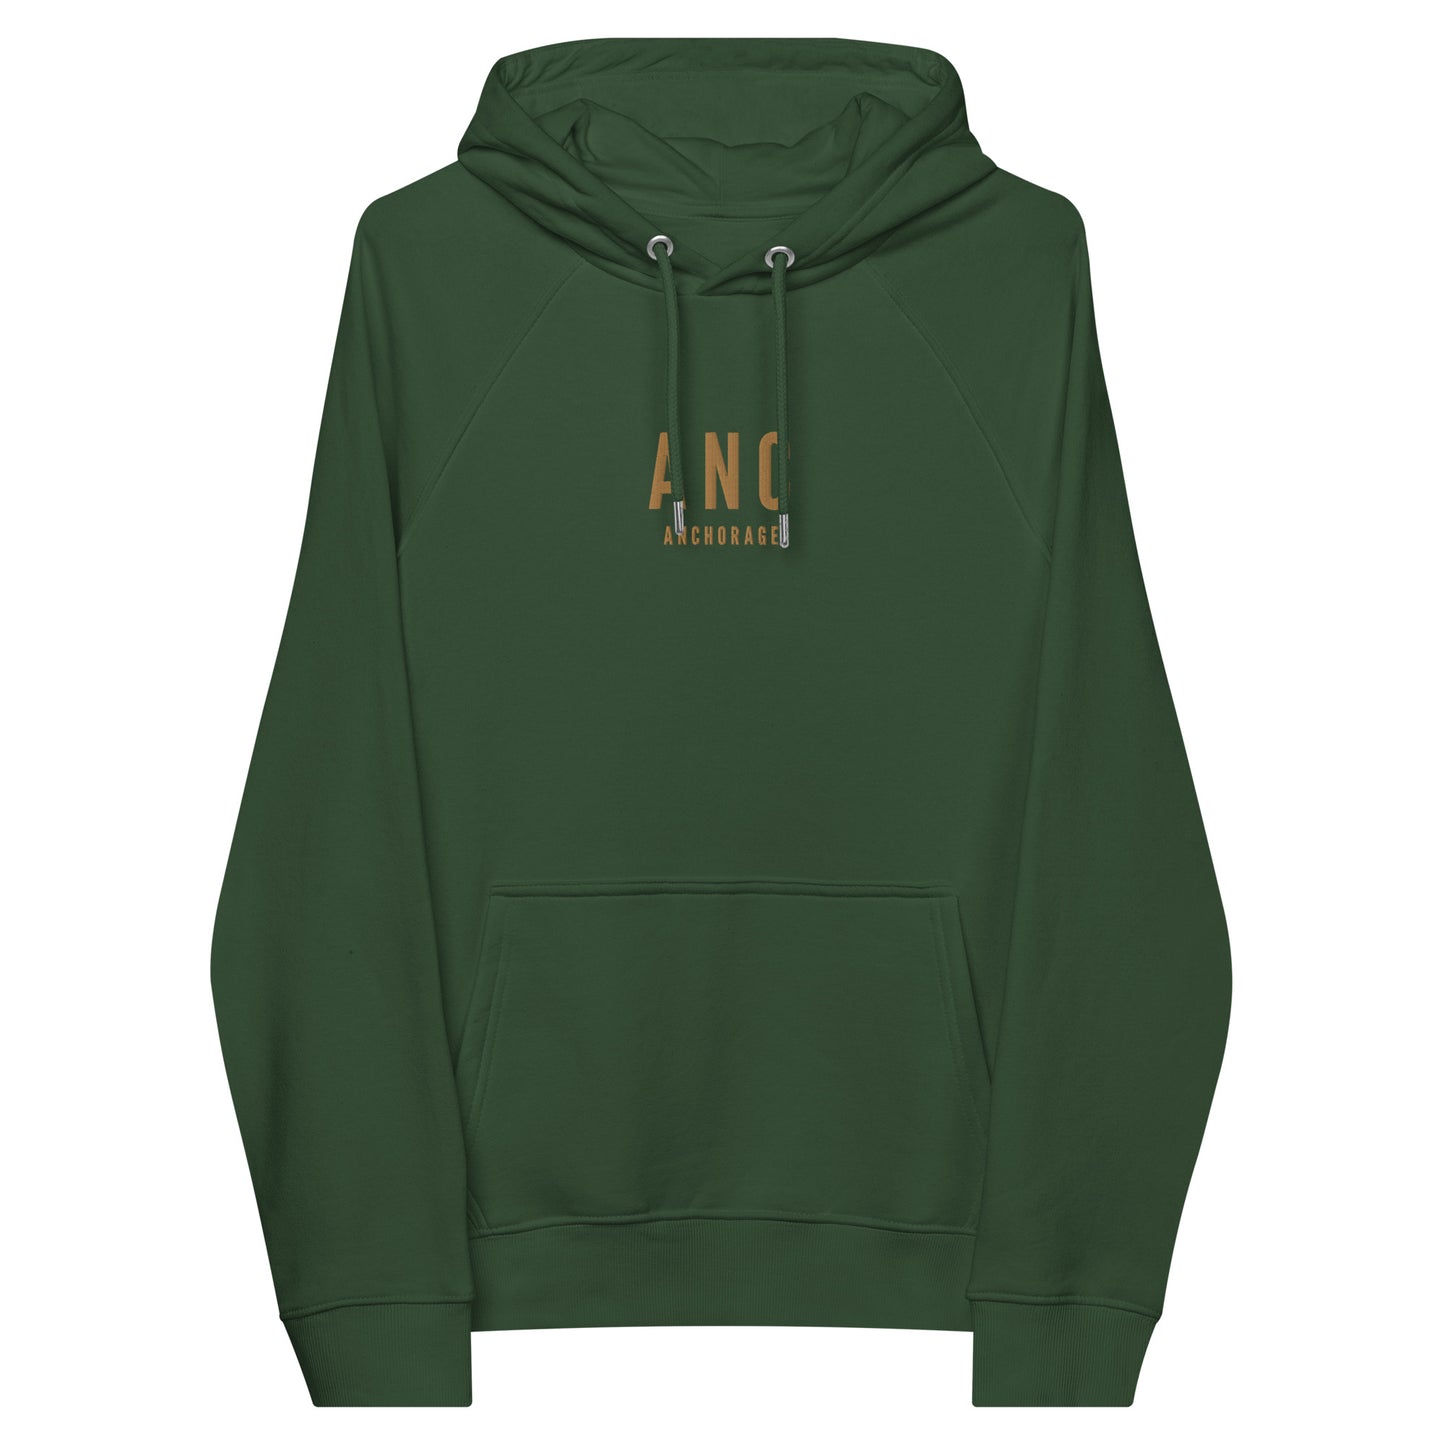 City Organic Hoodie - Old Gold • ANC Anchorage • YHM Designs - Image 08